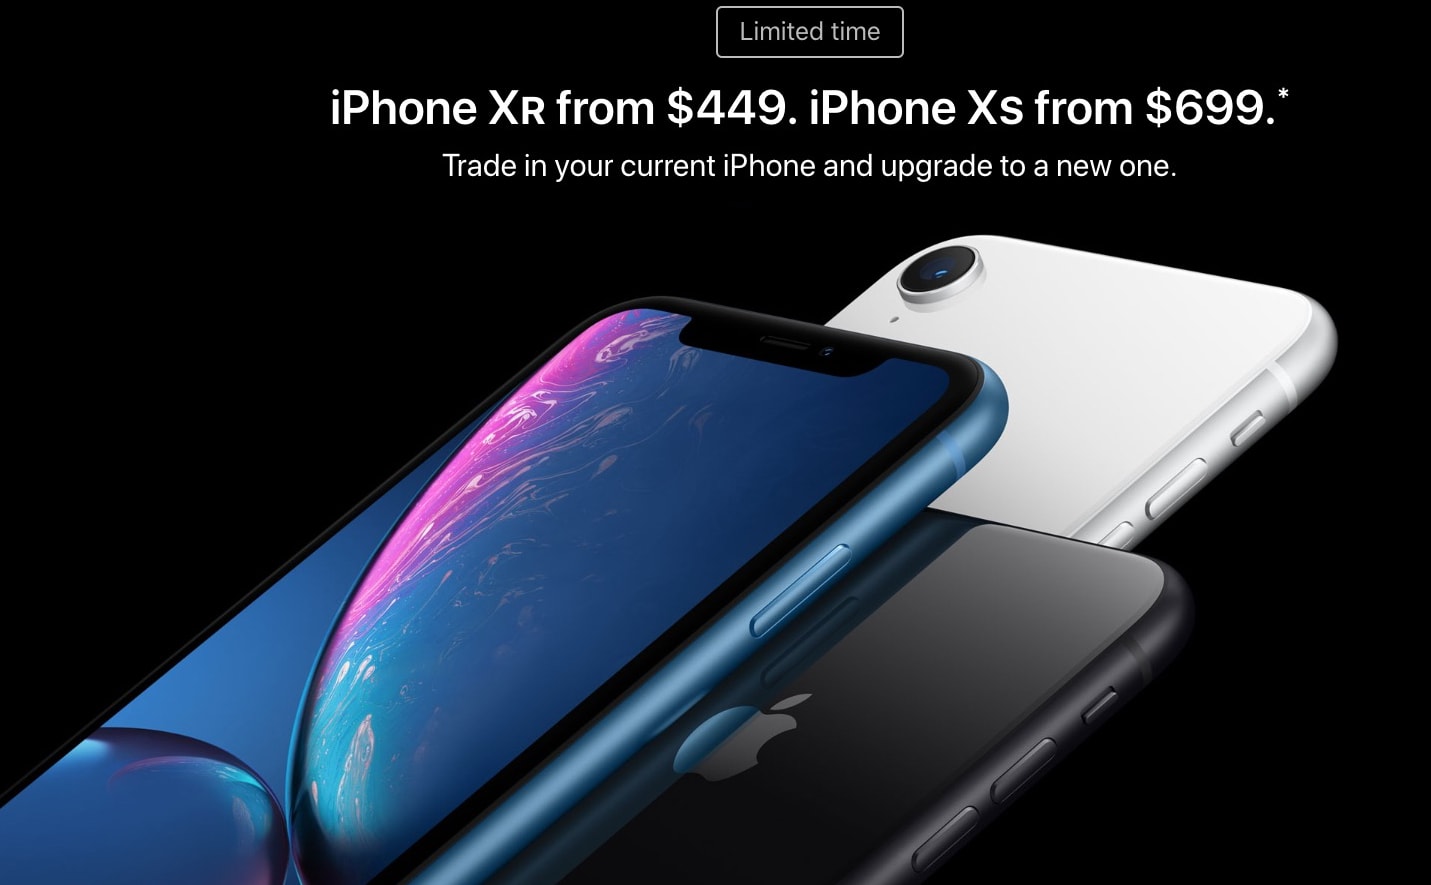 Apple still offers rare discounts on iPhone XR